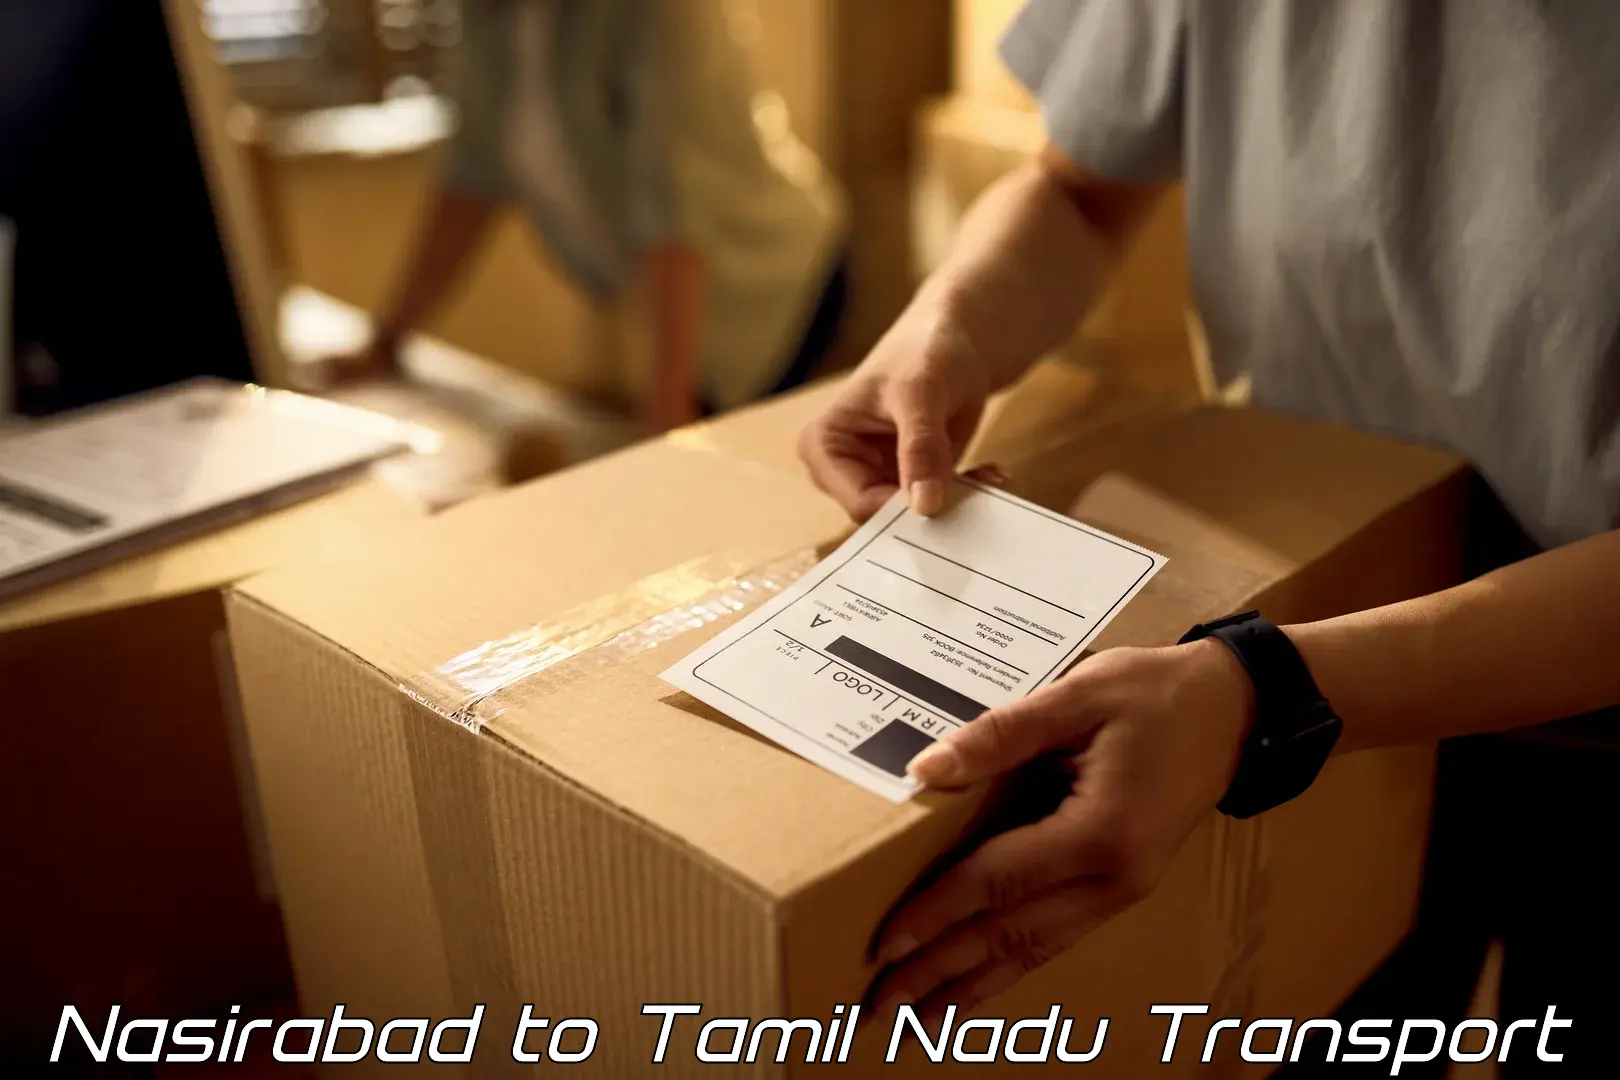 Furniture transport service Nasirabad to Vellore Institute of Technology